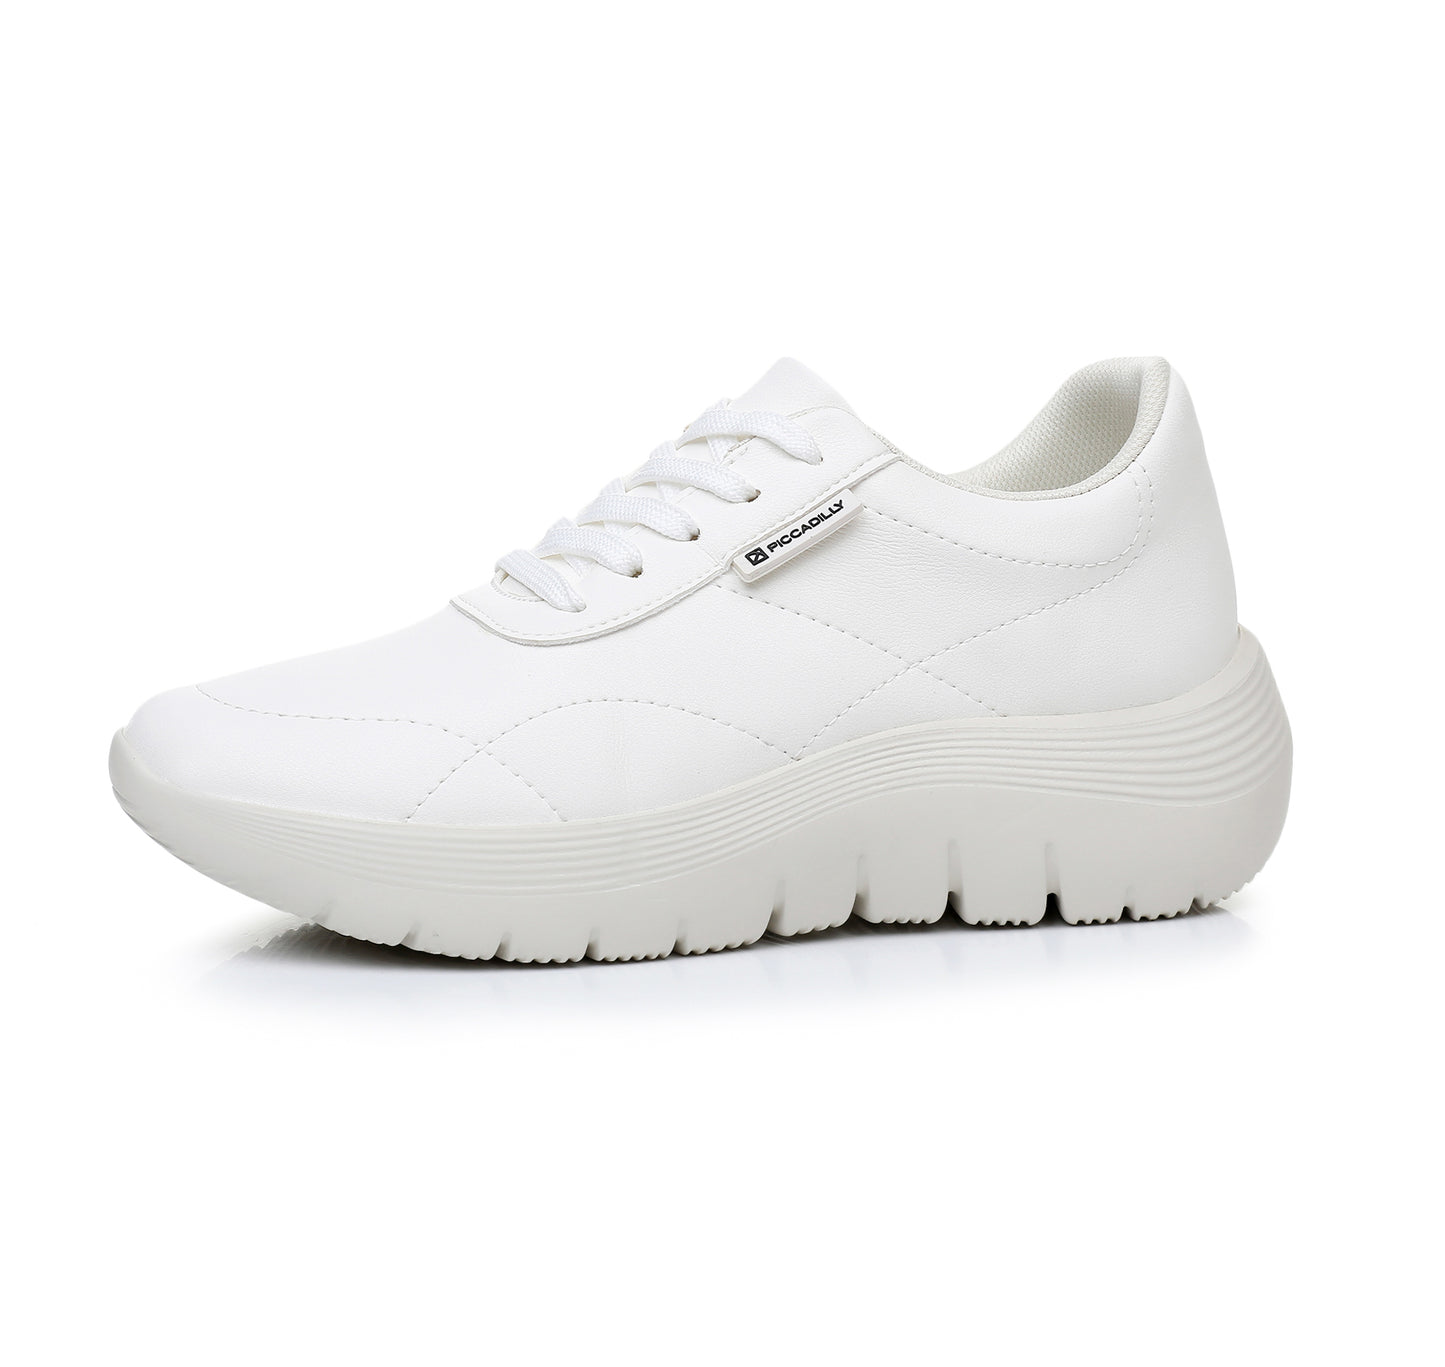 Everyday Essential Sneakers -White (936.007)